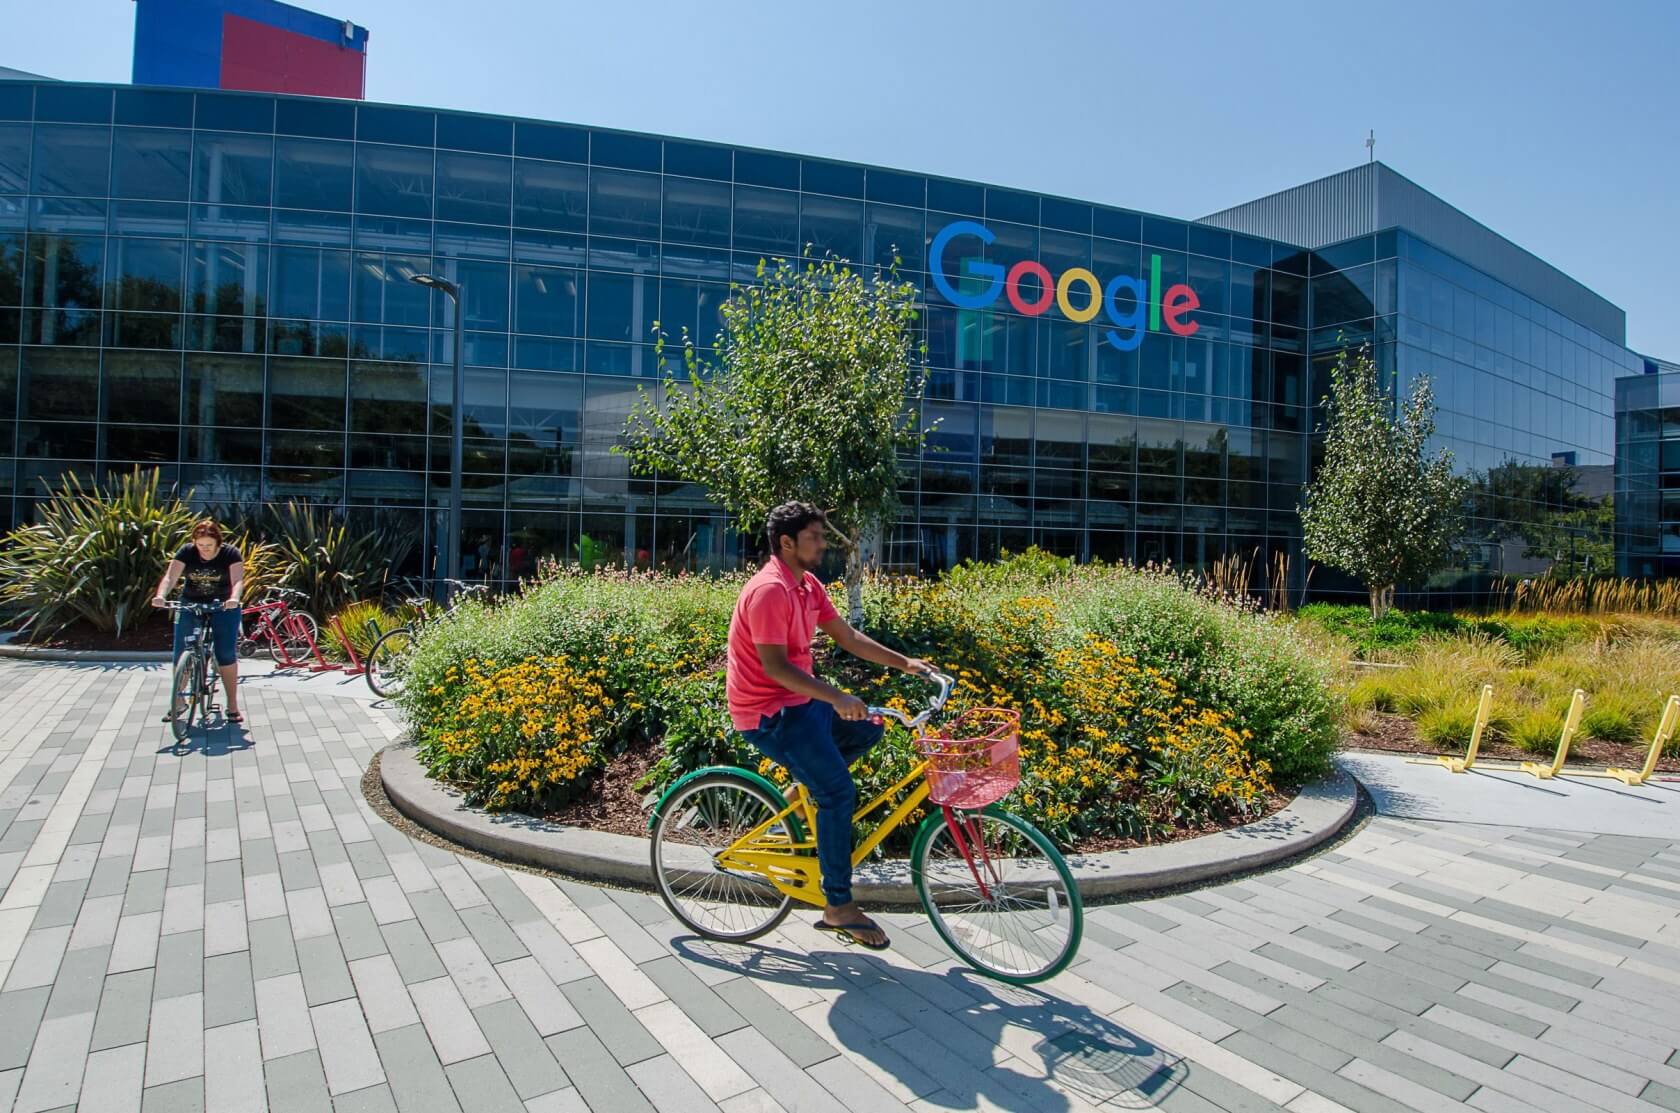 Google continues to make donations to anti-science groups despite their public environmental advocacy